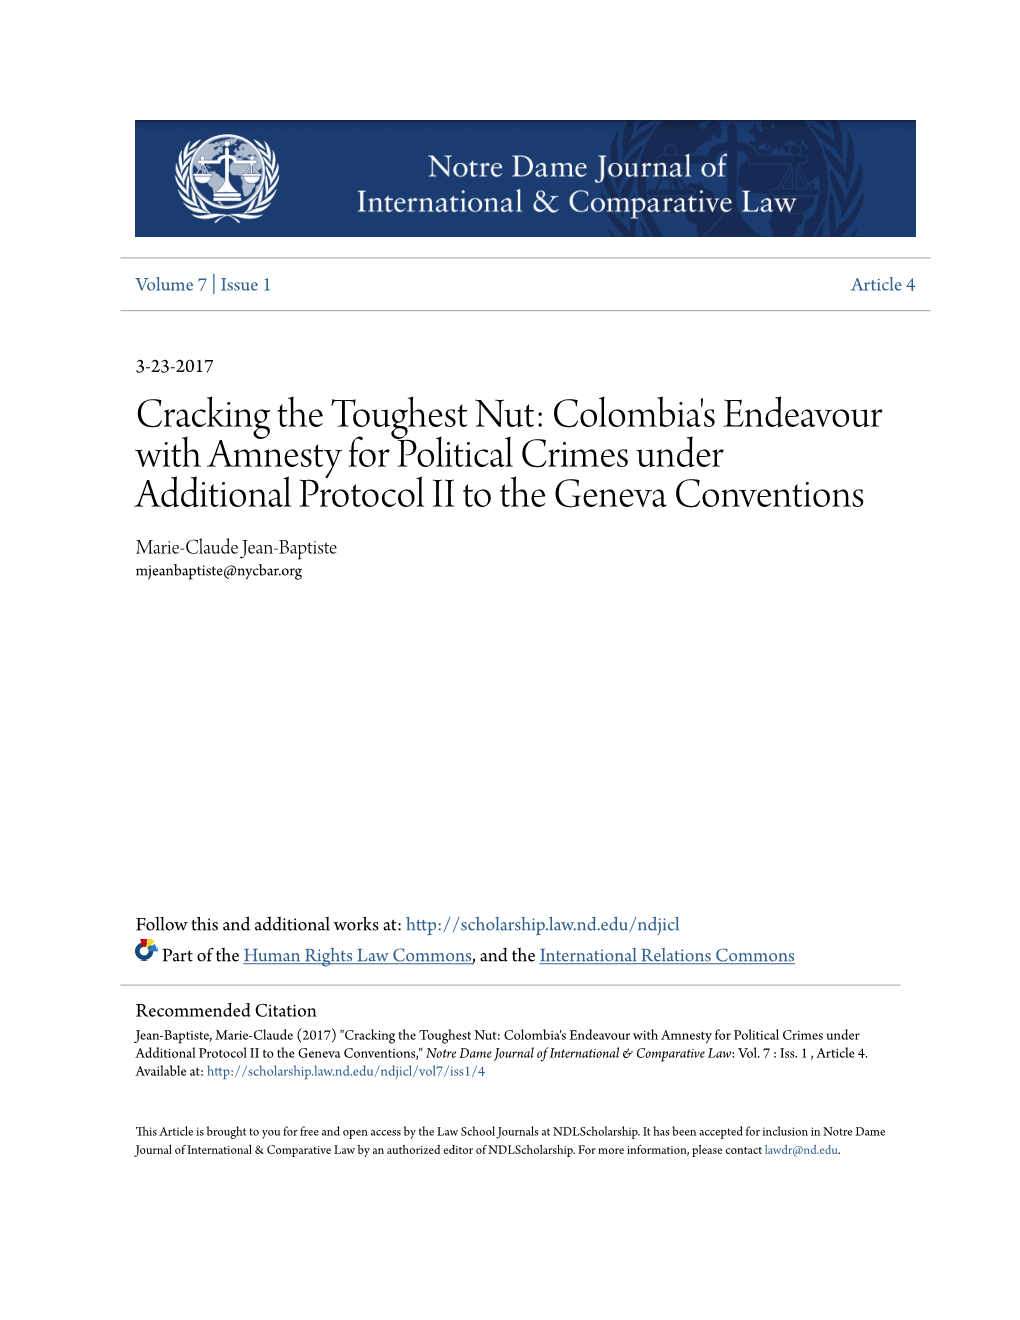 Colombia's Endeavour with Amnesty for Political Crimes Under Additional Protocol II to the Geneva Conventions Marie-Claude Jean-Baptiste Mjeanbaptiste@Nycbar.Org